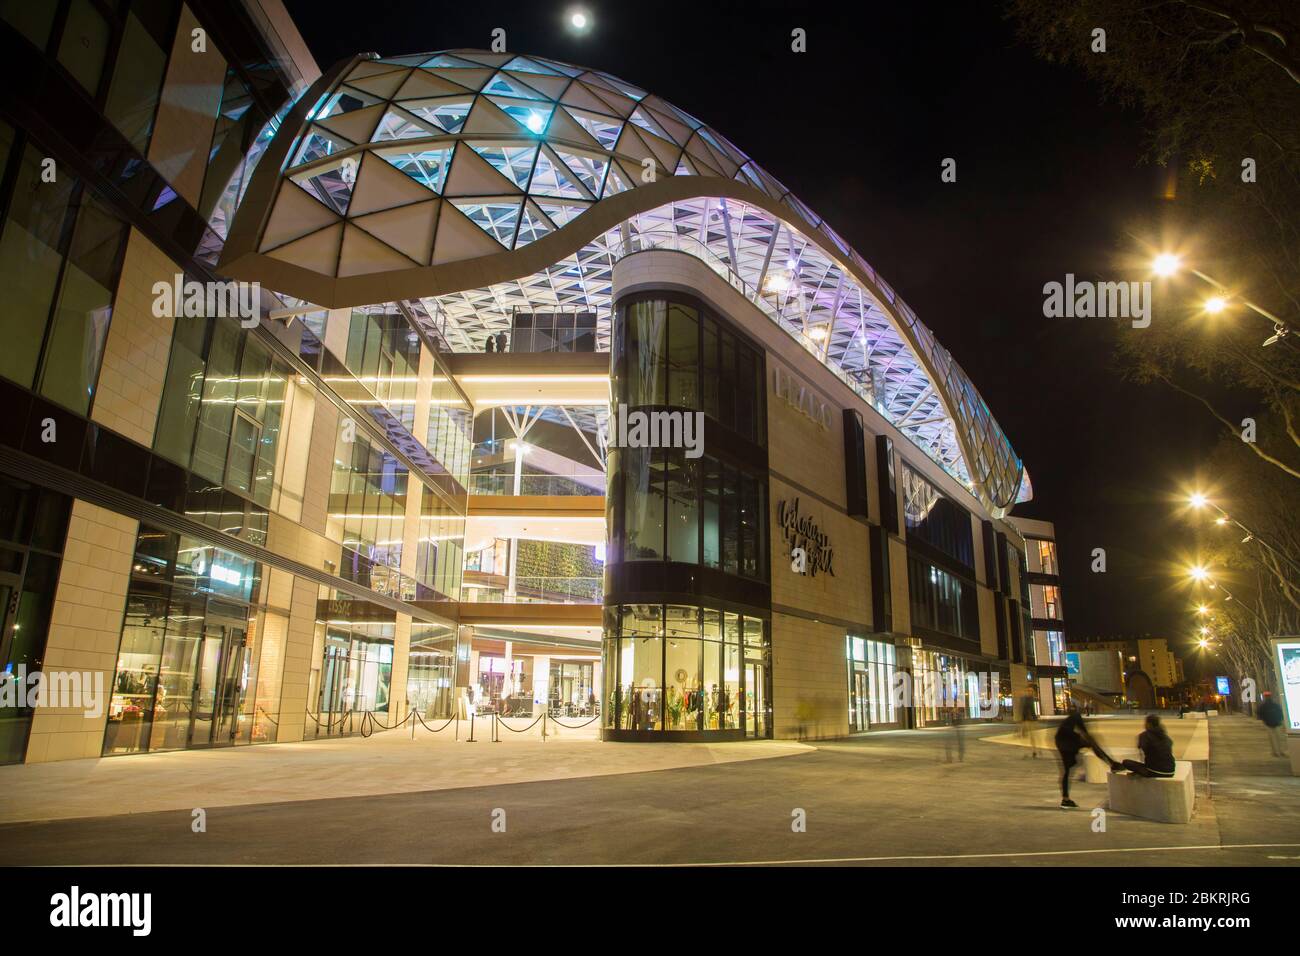 France, Bouches du Rhone, Marseille, Le Prado, high end shopping center at  the foot of the velodrome stadium, designed as a shopping center on 4  levels with a glass canopy by the